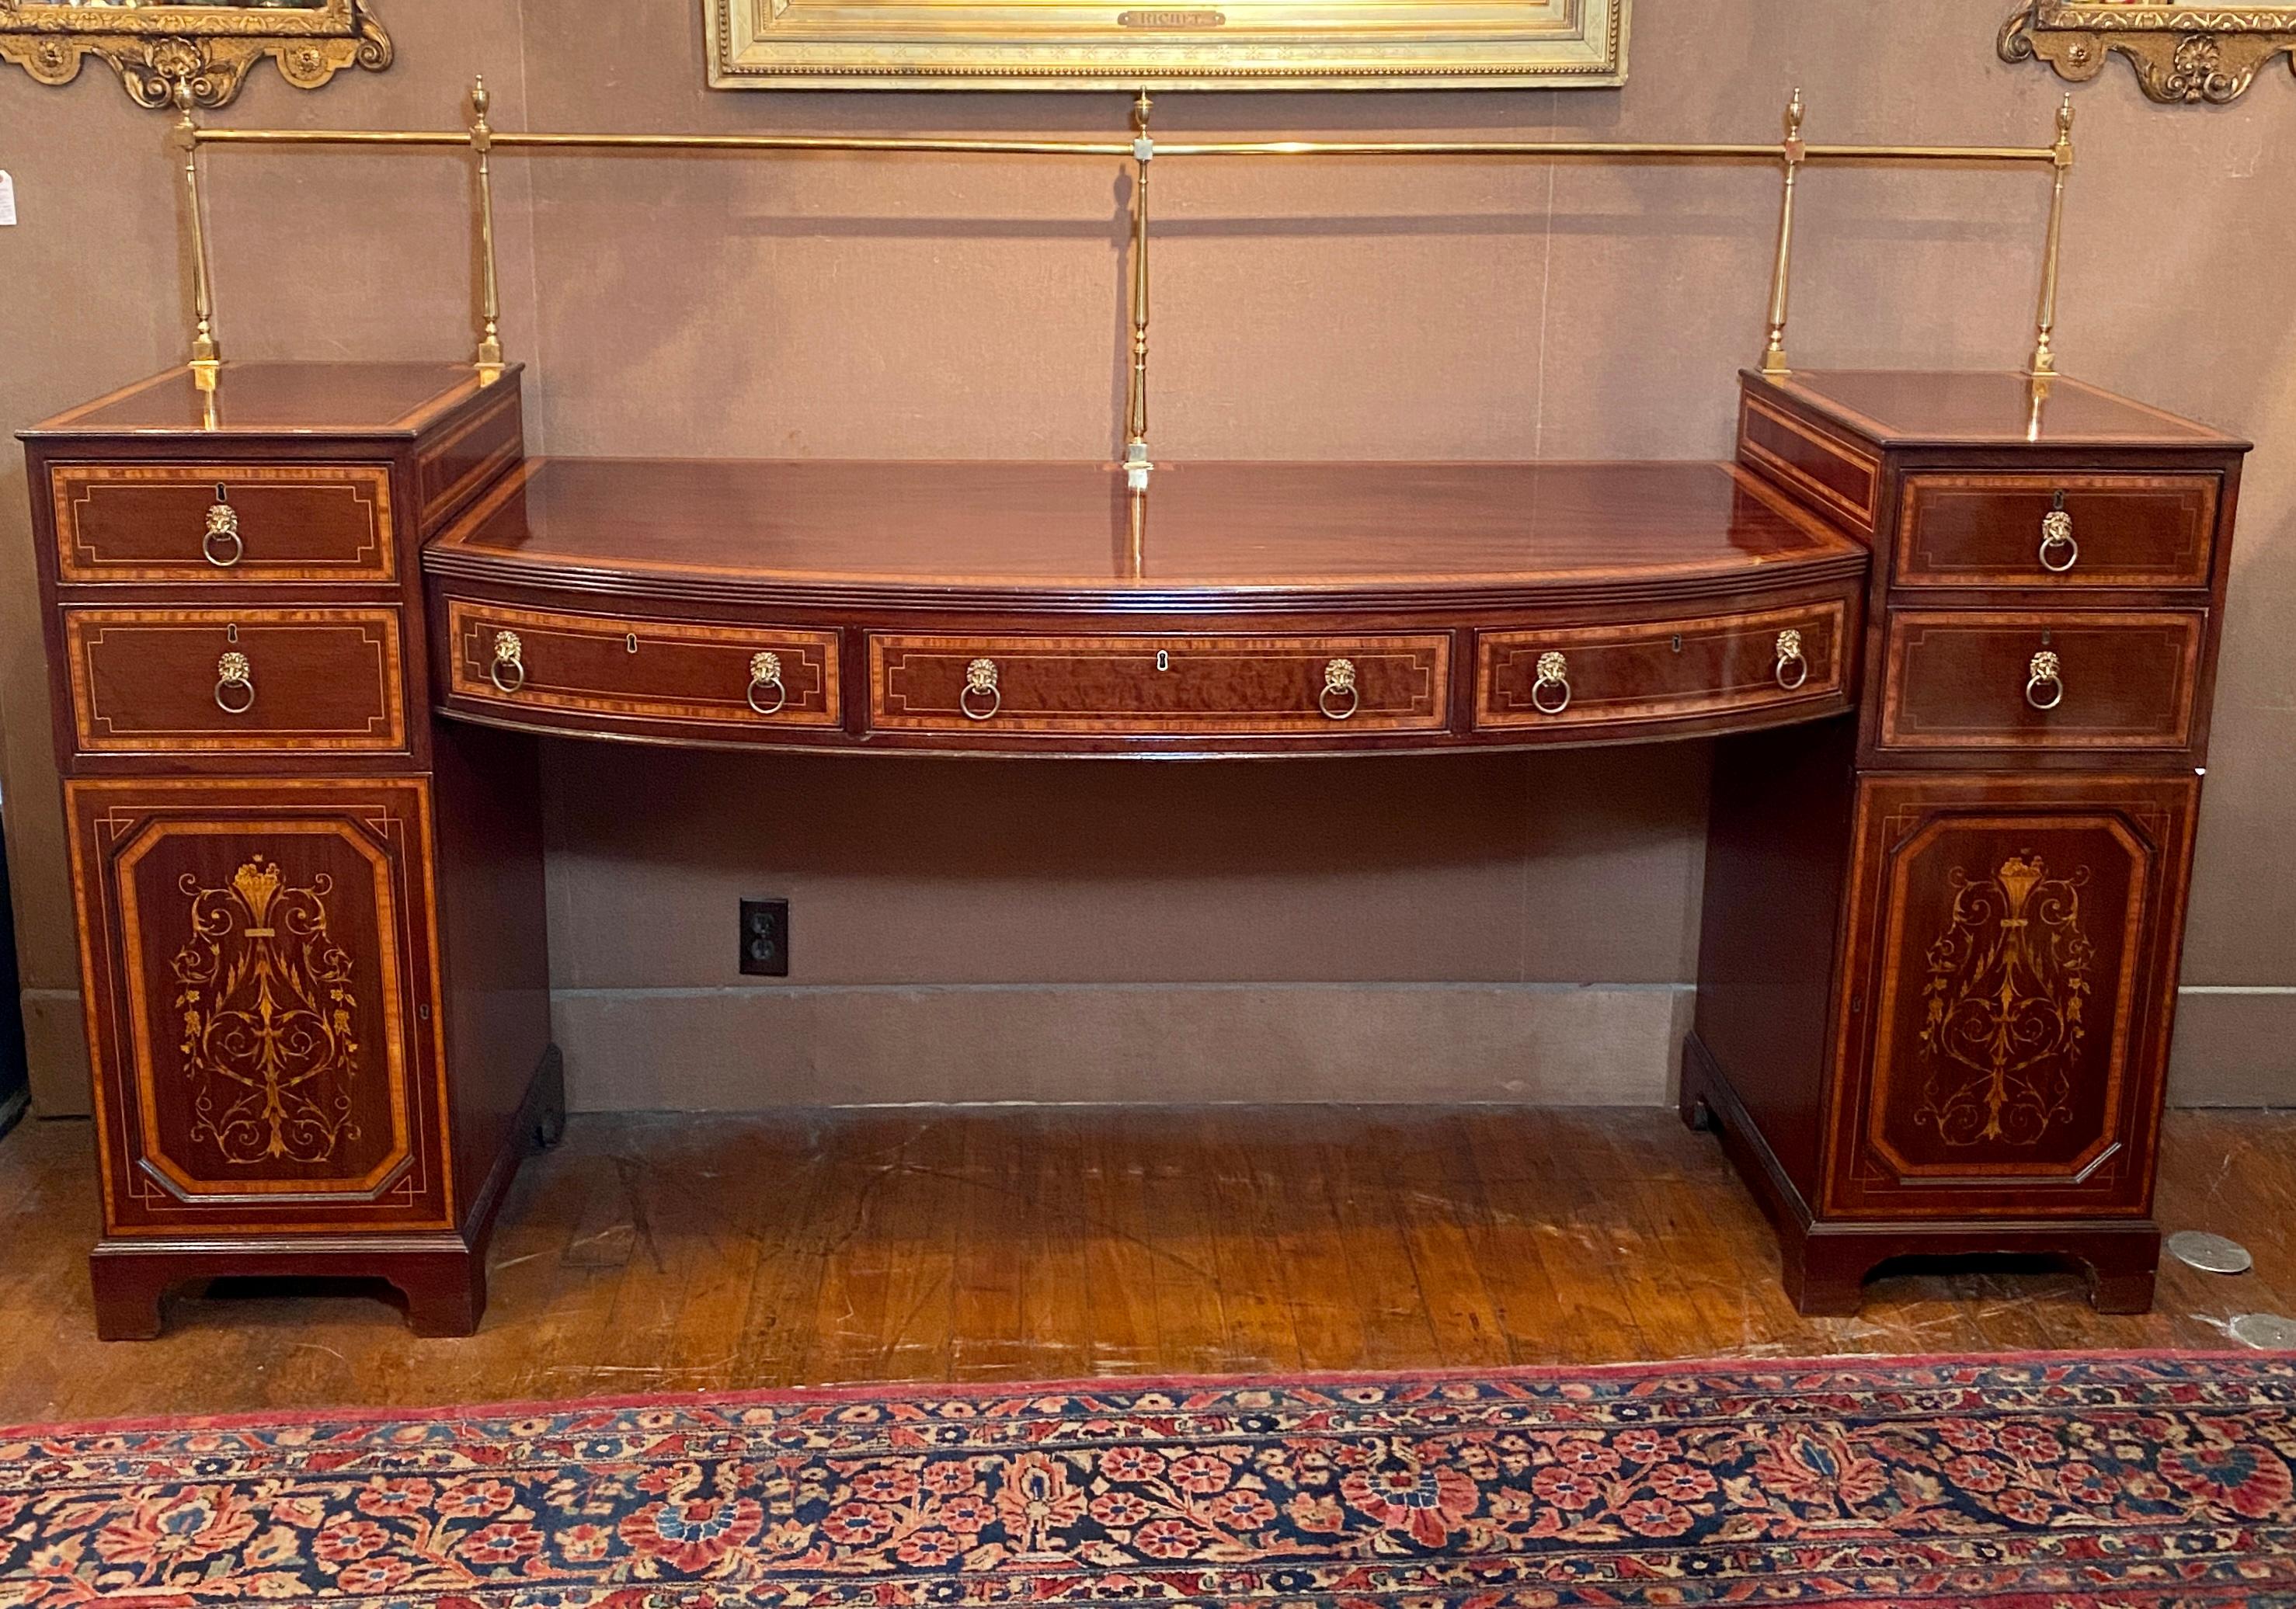 Exceptional Antique English Sheraton Finely Inlaid Mahogany Sideboard With Brass Rail, Circa 1870-1880.  Signed Edwards & Roberts
Rail Height 58''
Side Height 43''
Center Height 37.5''
      